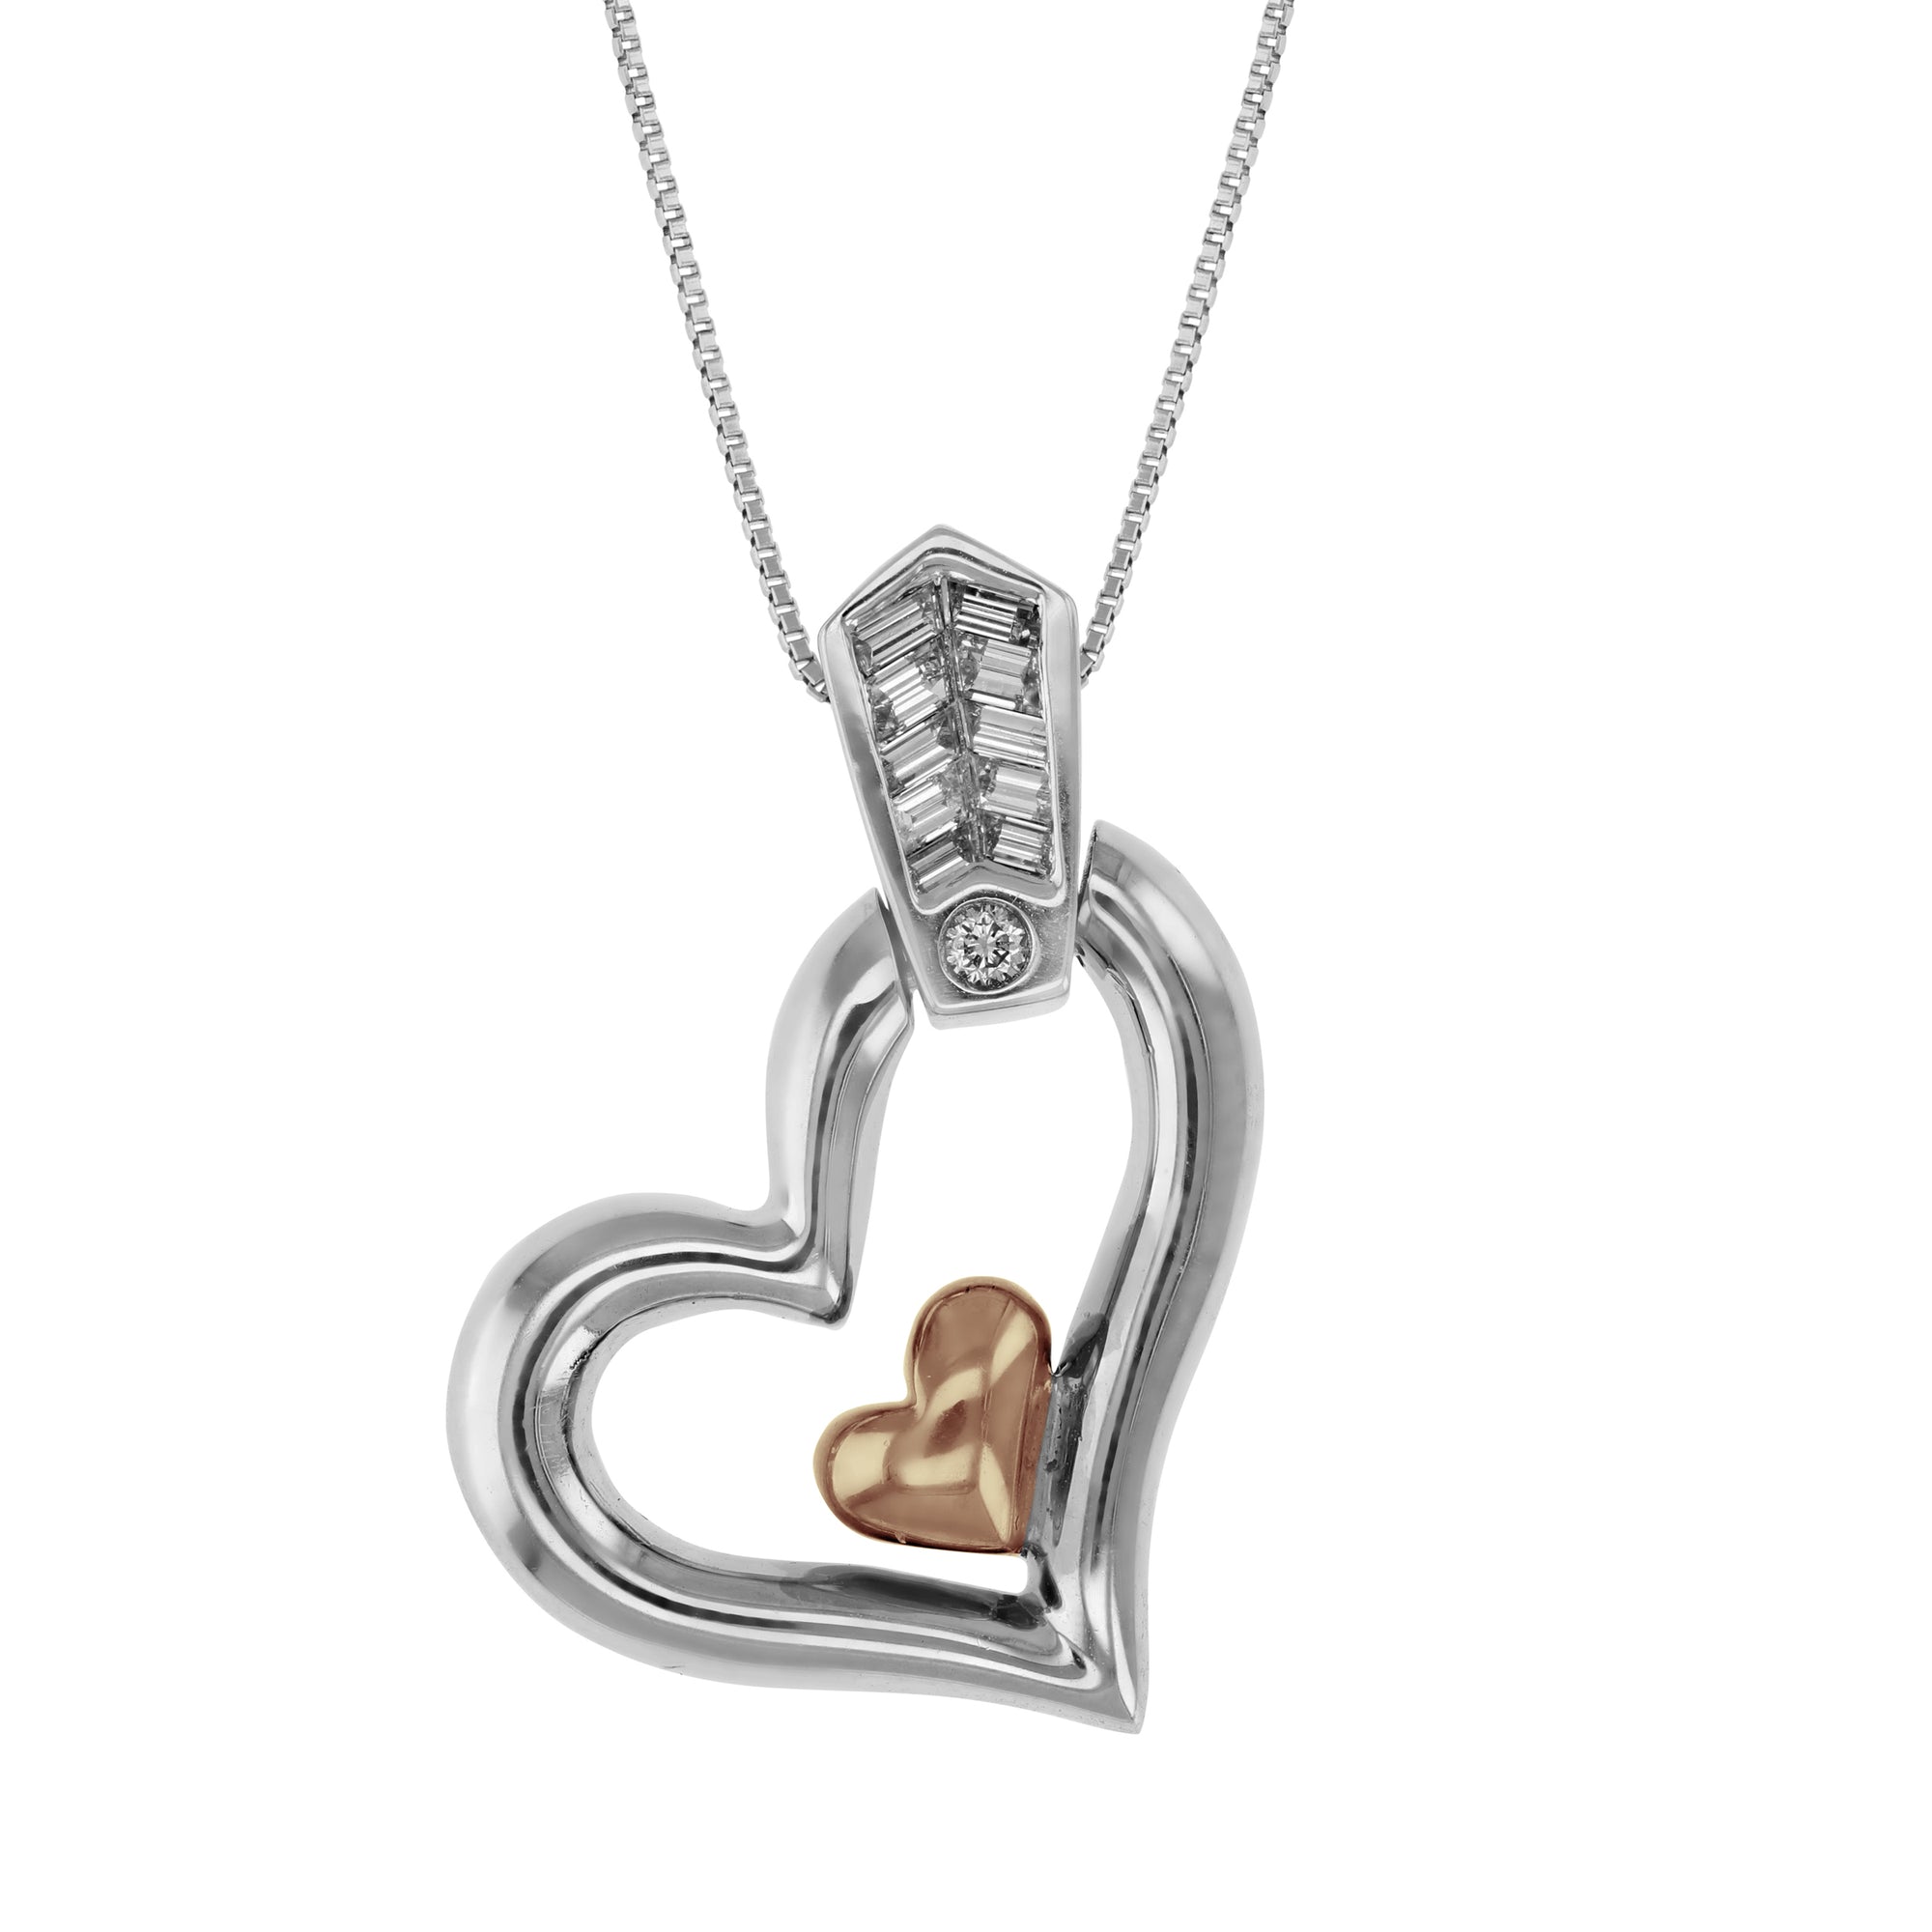 0.15 cttw Diamond Heart Pendant in 14K White and Rose Gold with 18 Inch Chain